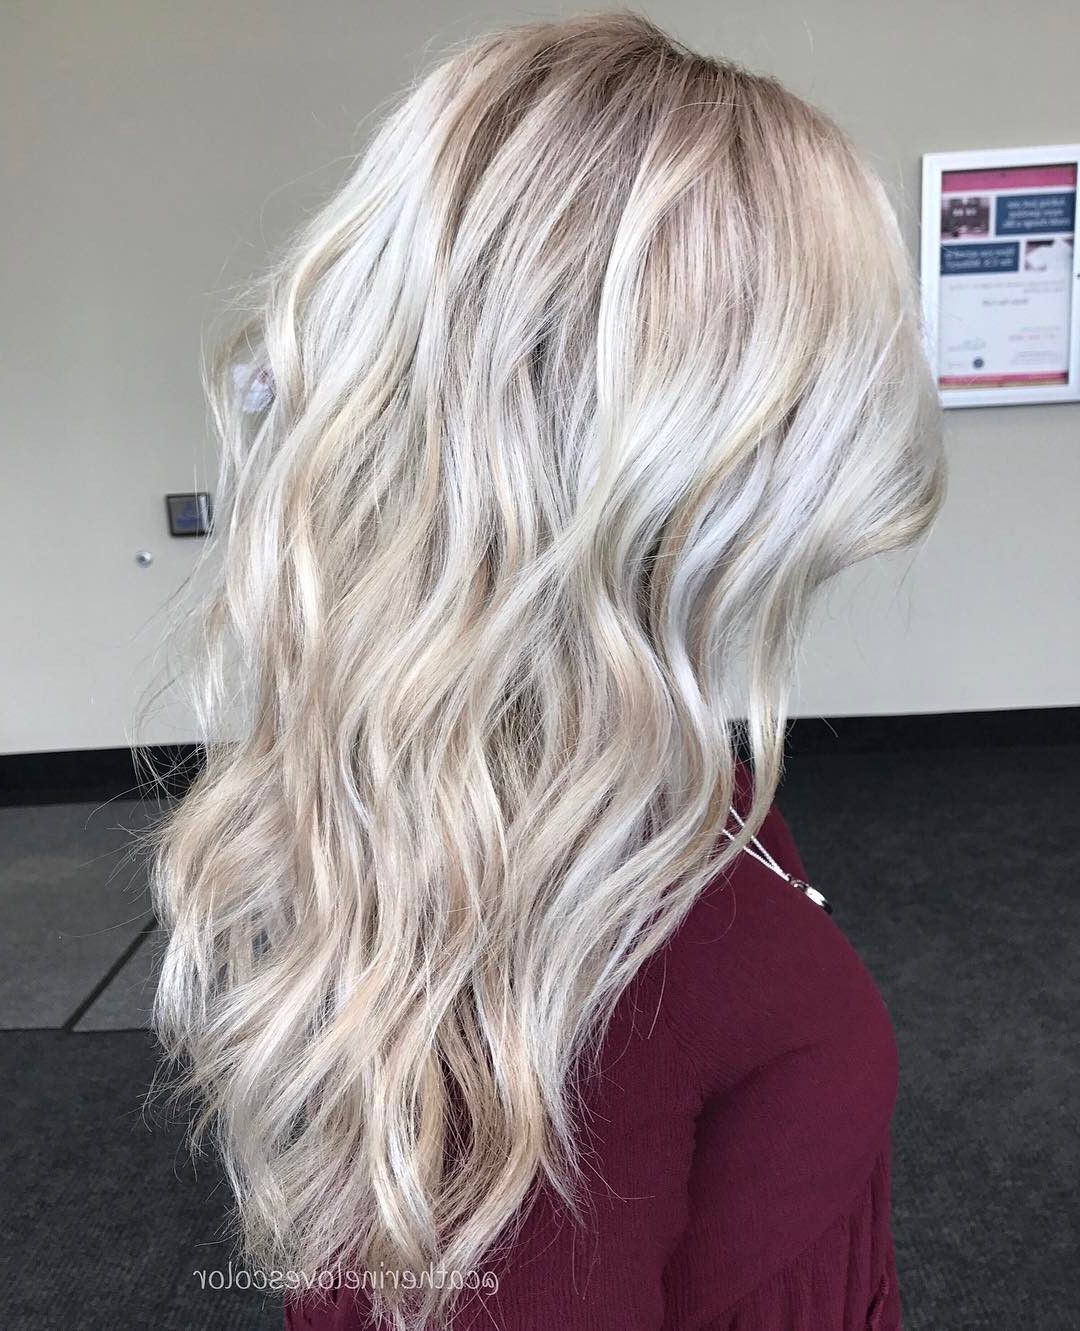 20 Adorable Ash Blonde Hairstyles To Try: Hair Color Ideas 2018 Throughout White Blonde Curly Layered Bob Hairstyles (Photo 20 of 25)